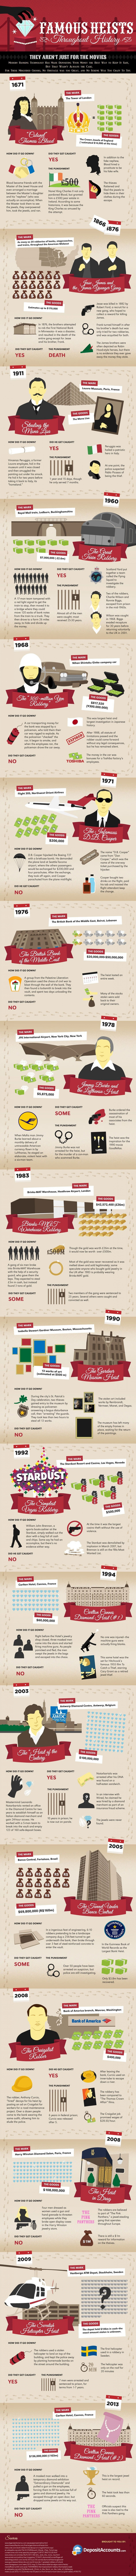 Famous Heists Throughout History Infographic